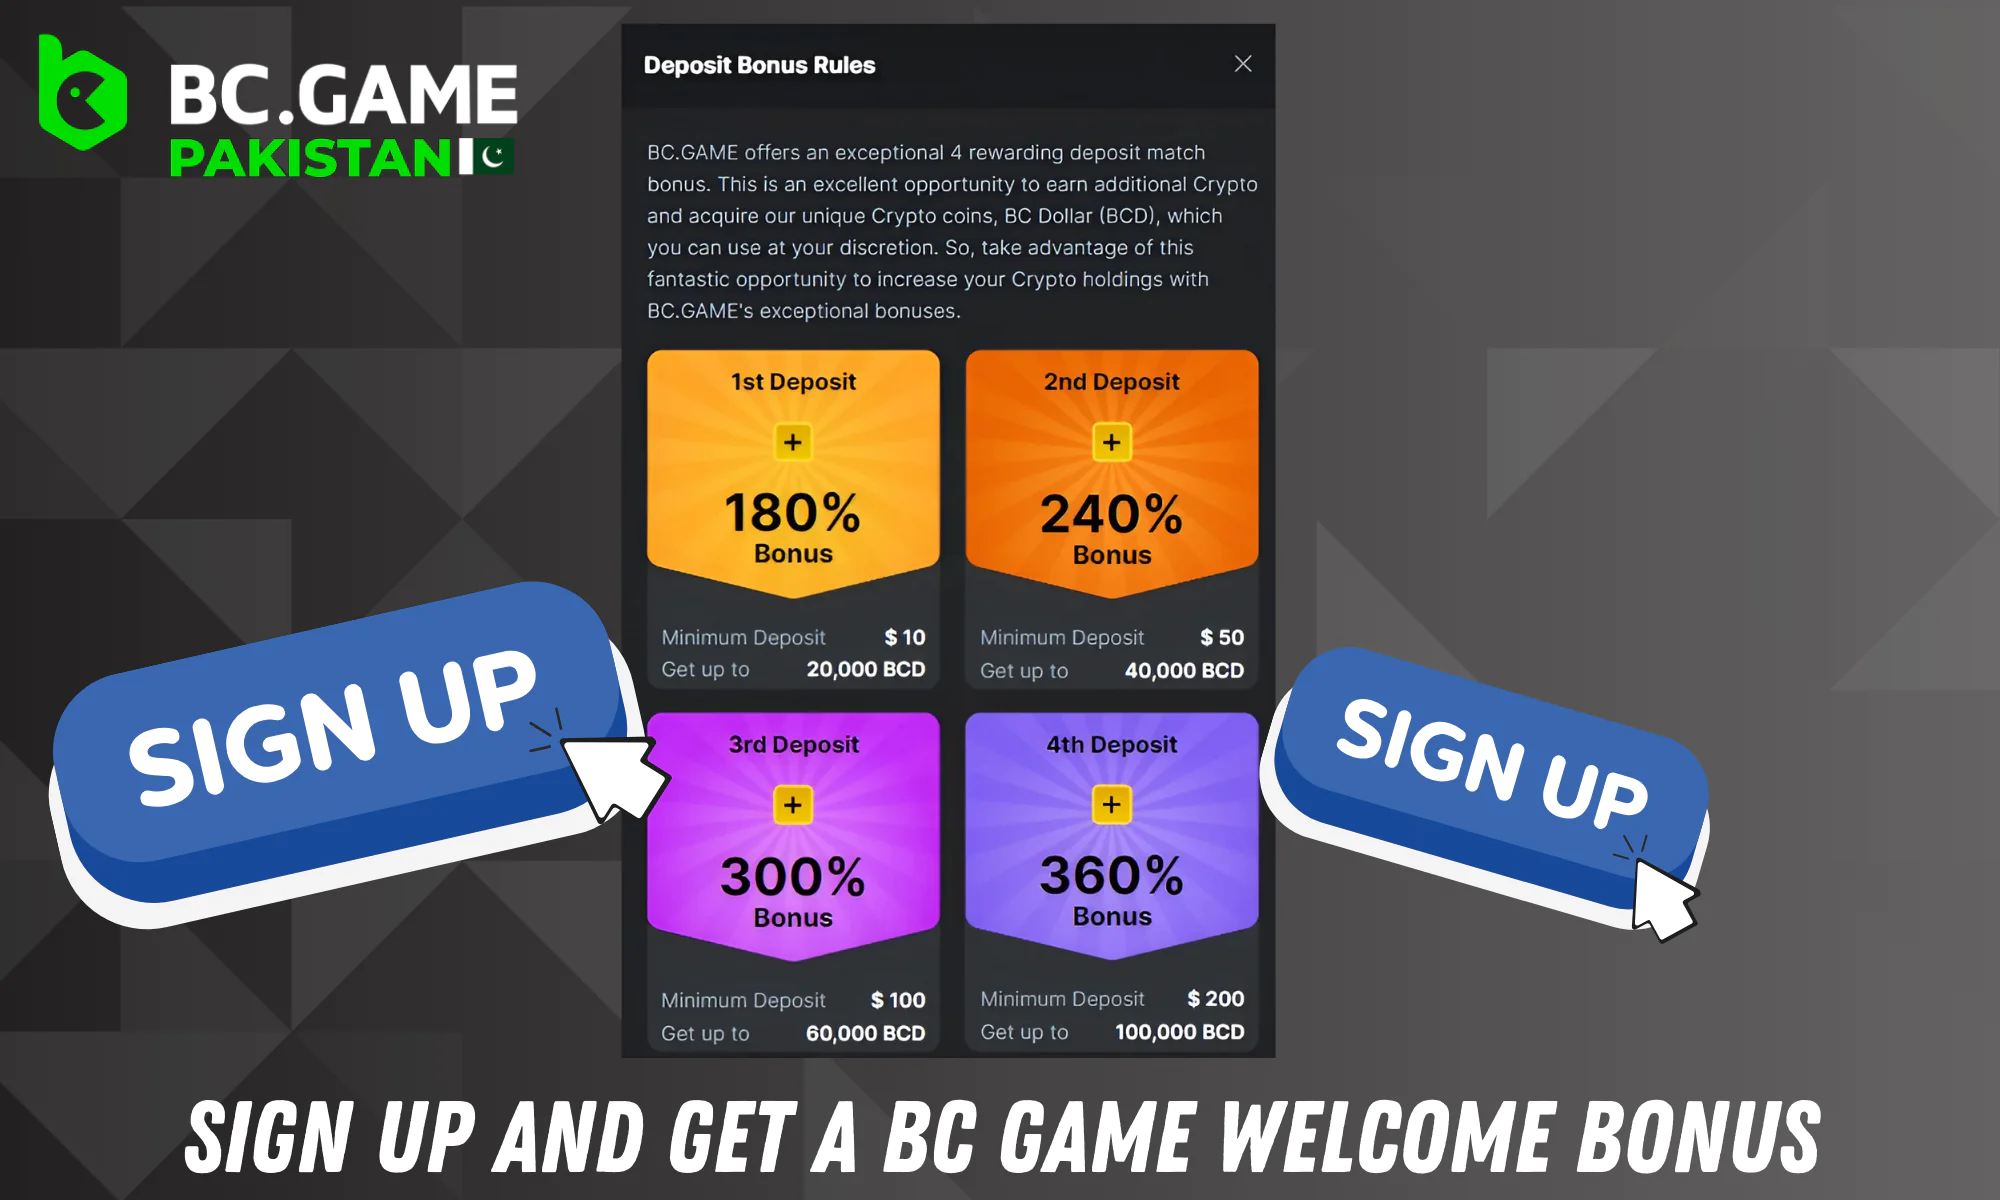 After completing the registration process, you will be able to receive welcome bonuses from BC Game